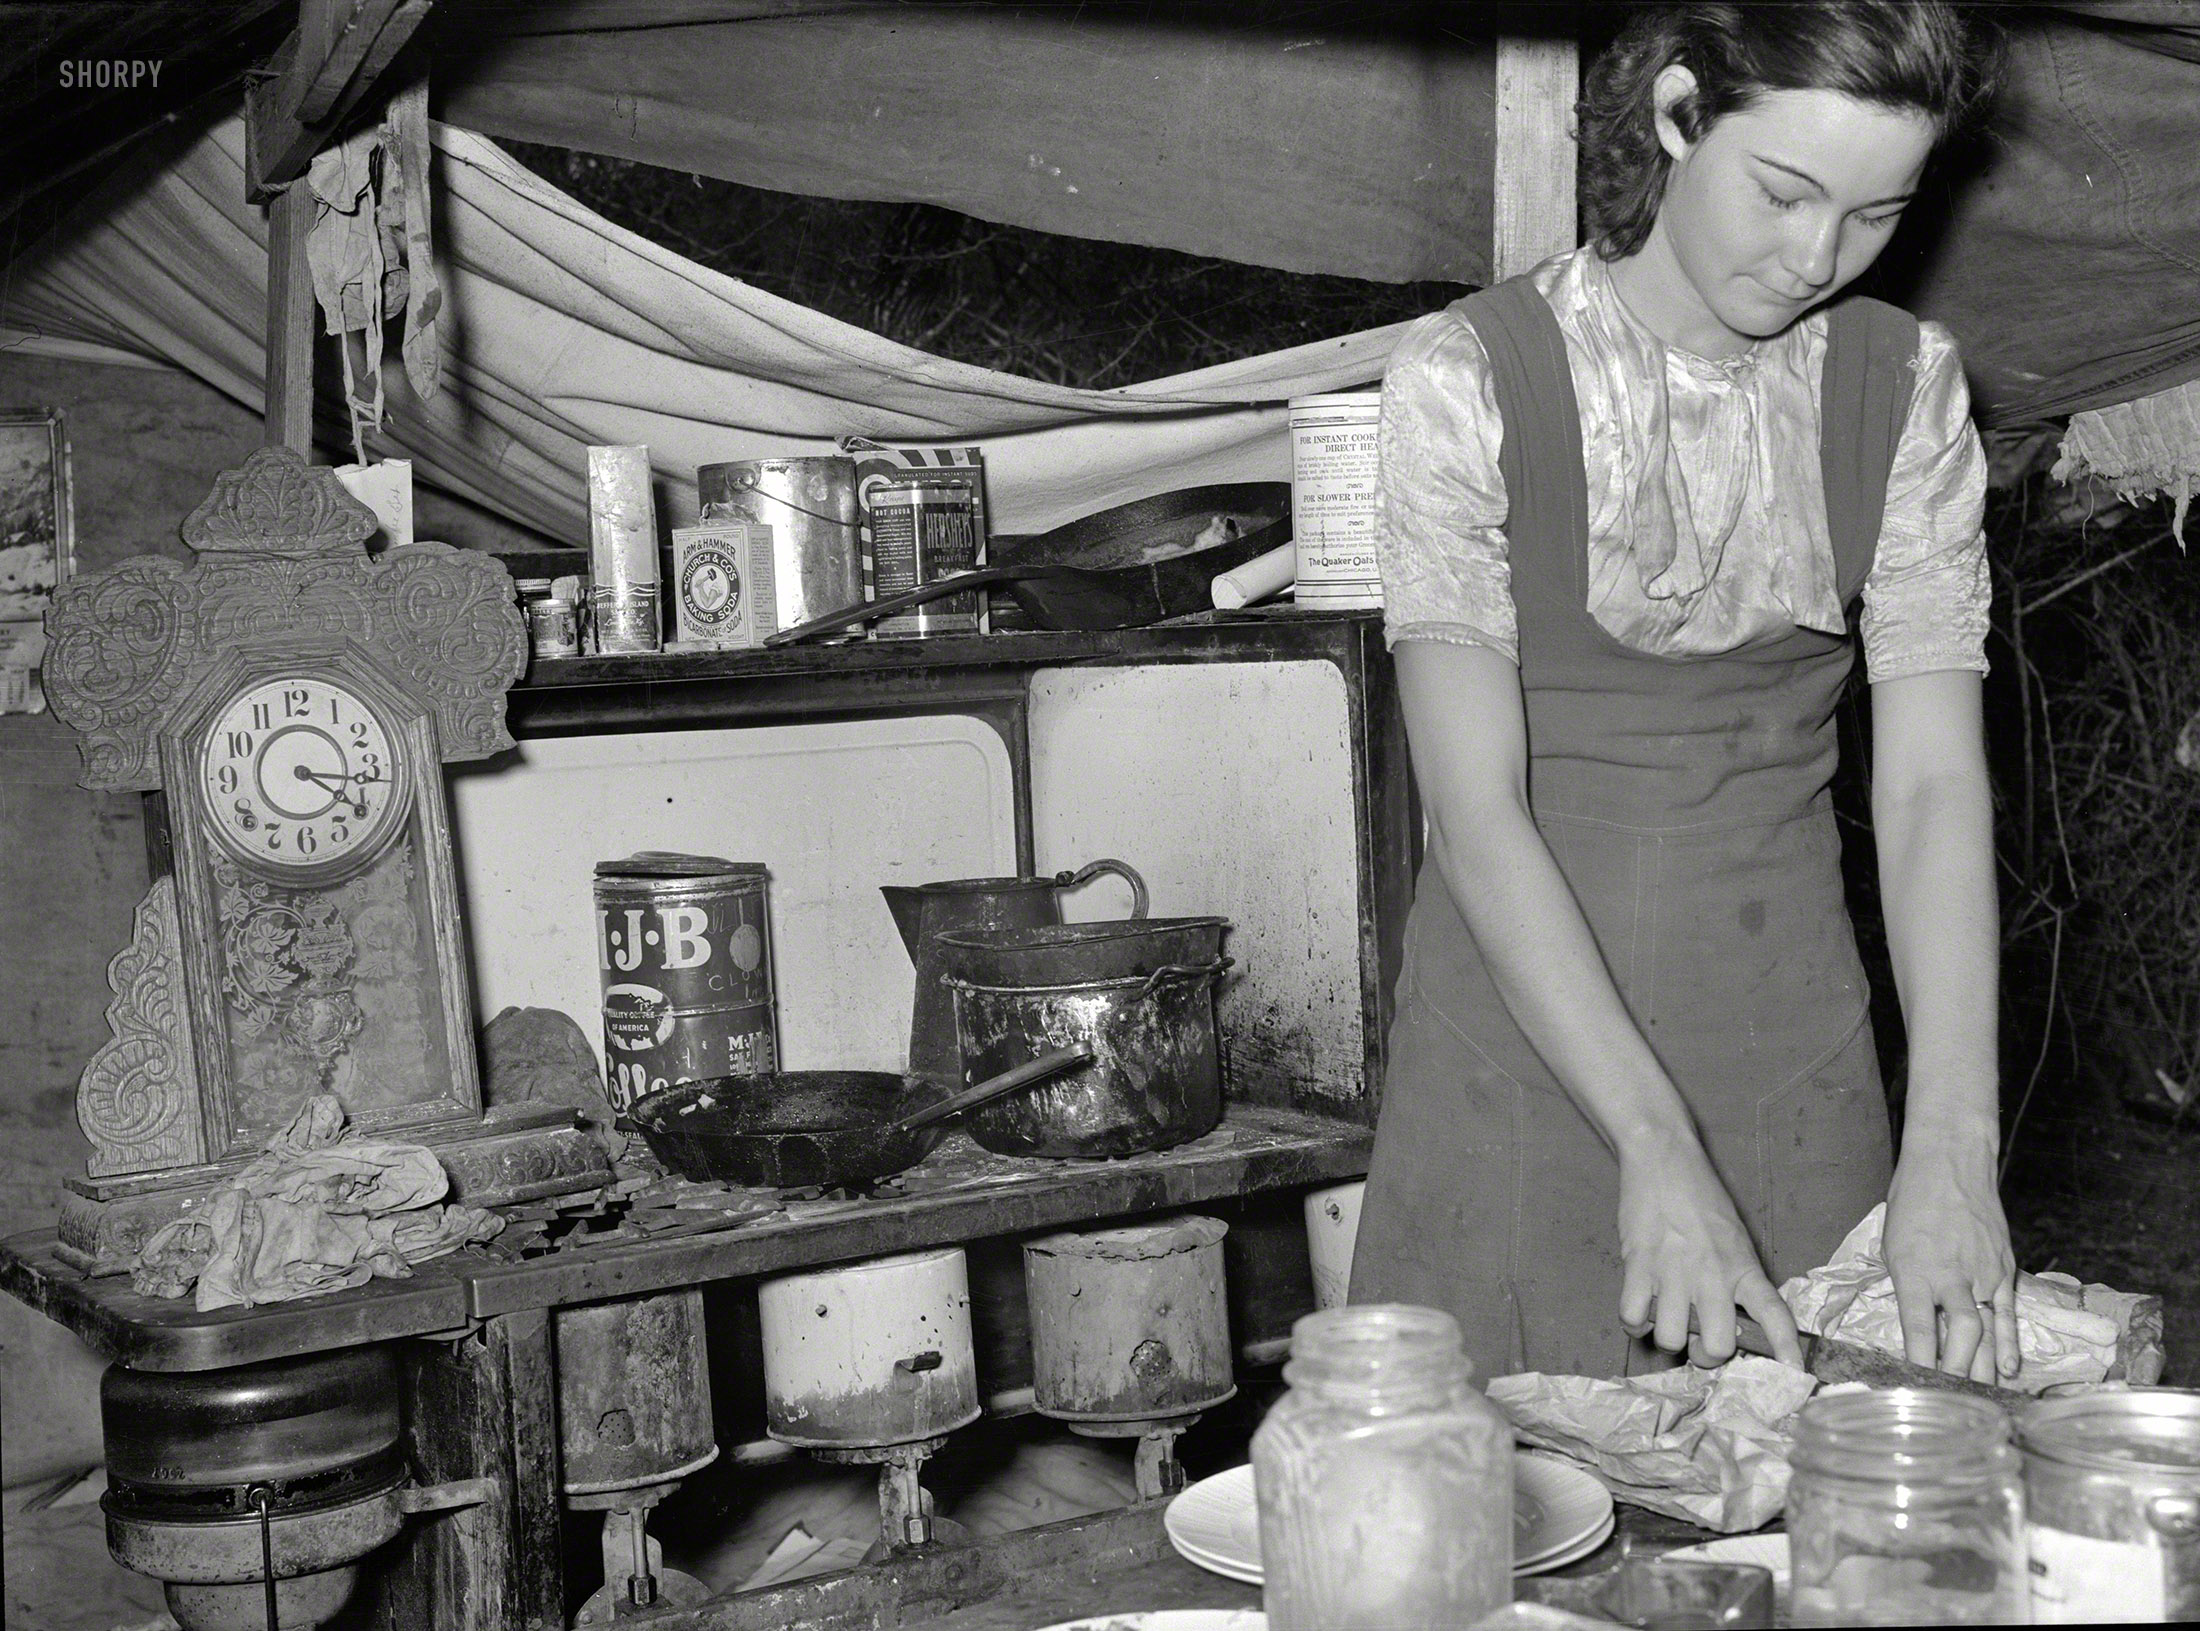 February 1939. "Kitchen table and stove of white migrant tent camp near Harlingen, Texas. Married daughter of migrant worker cutting salt meat for dinner." Medium-format nitrate negative by Russell Lee. View full size.